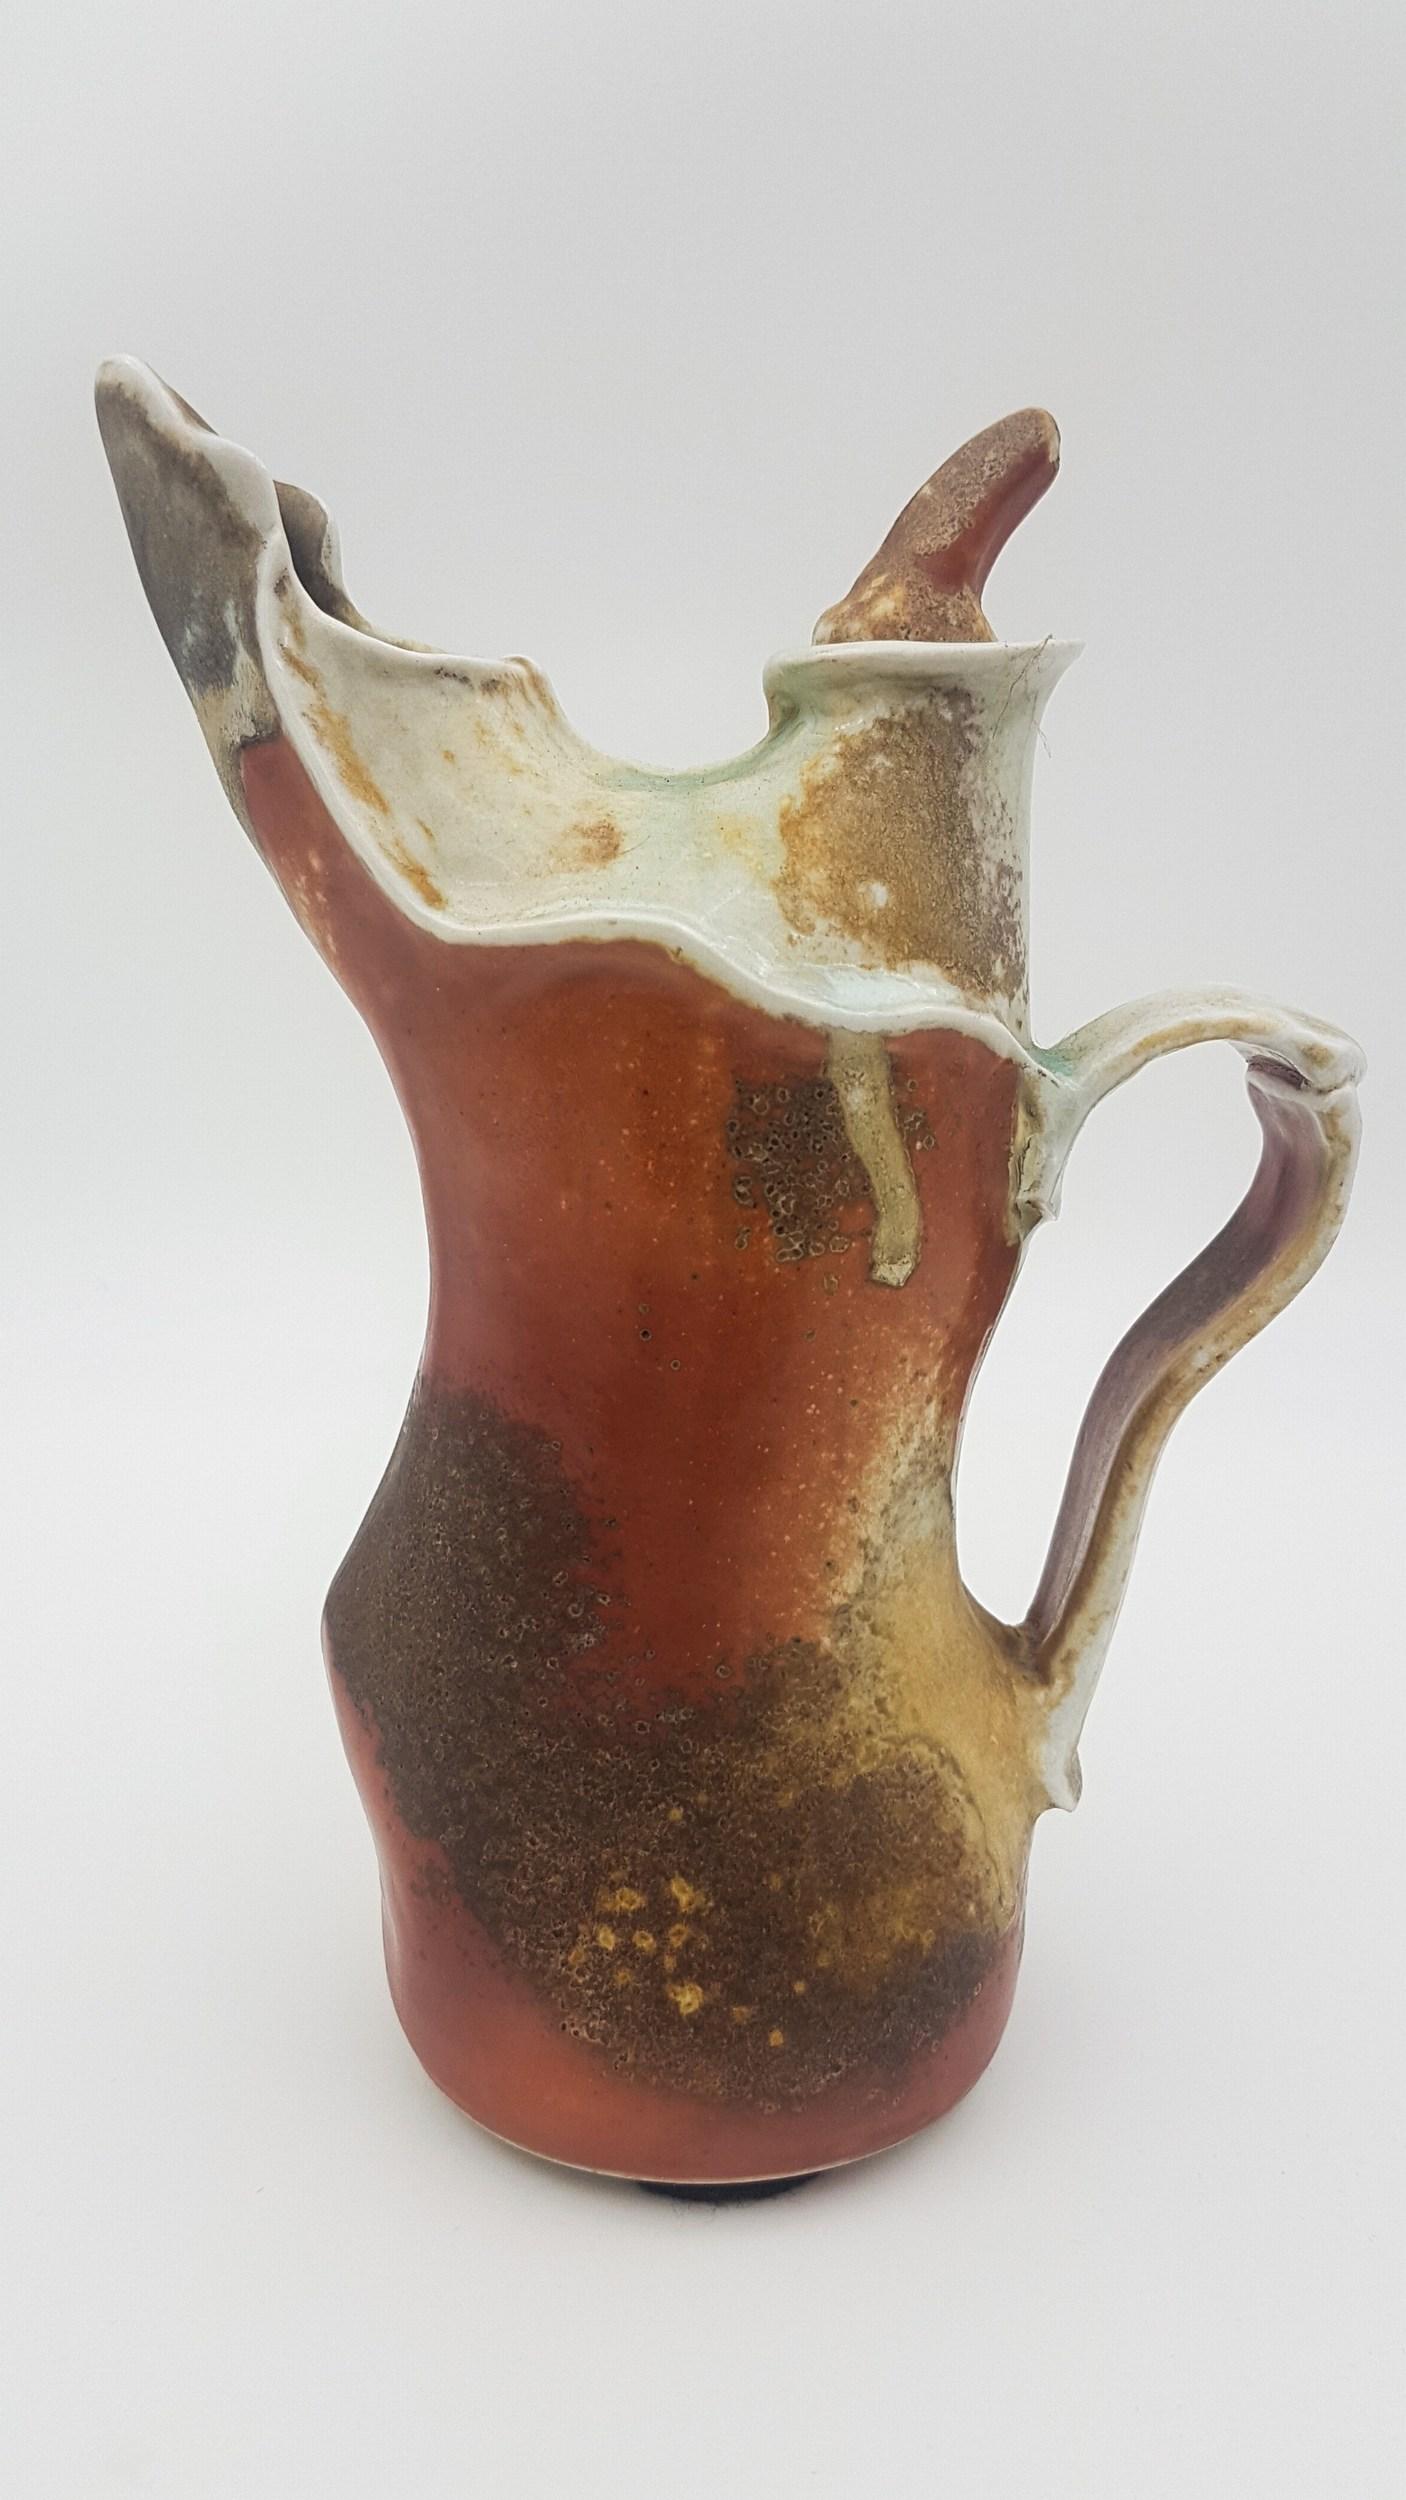 Melanie Sherman Abstract Sculpture - Wood Fired Pitcher (Anagama, Cave, Kiln, Dan Anderson, Rustic)